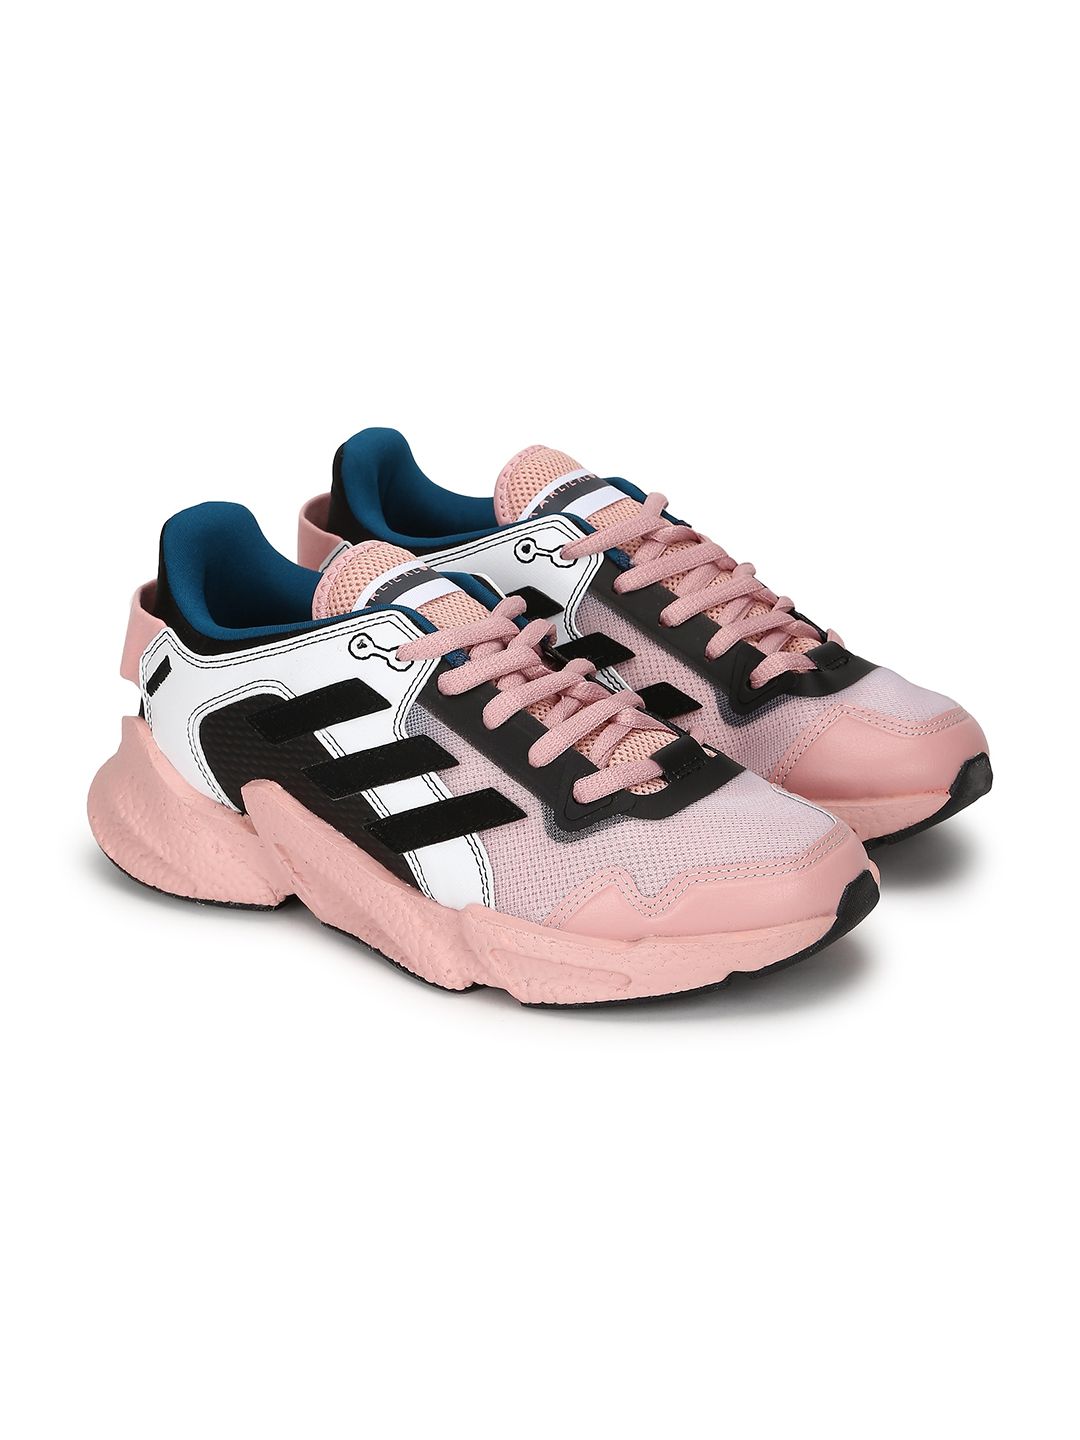 ADIDAS Women Pink Running Shoes Price in India